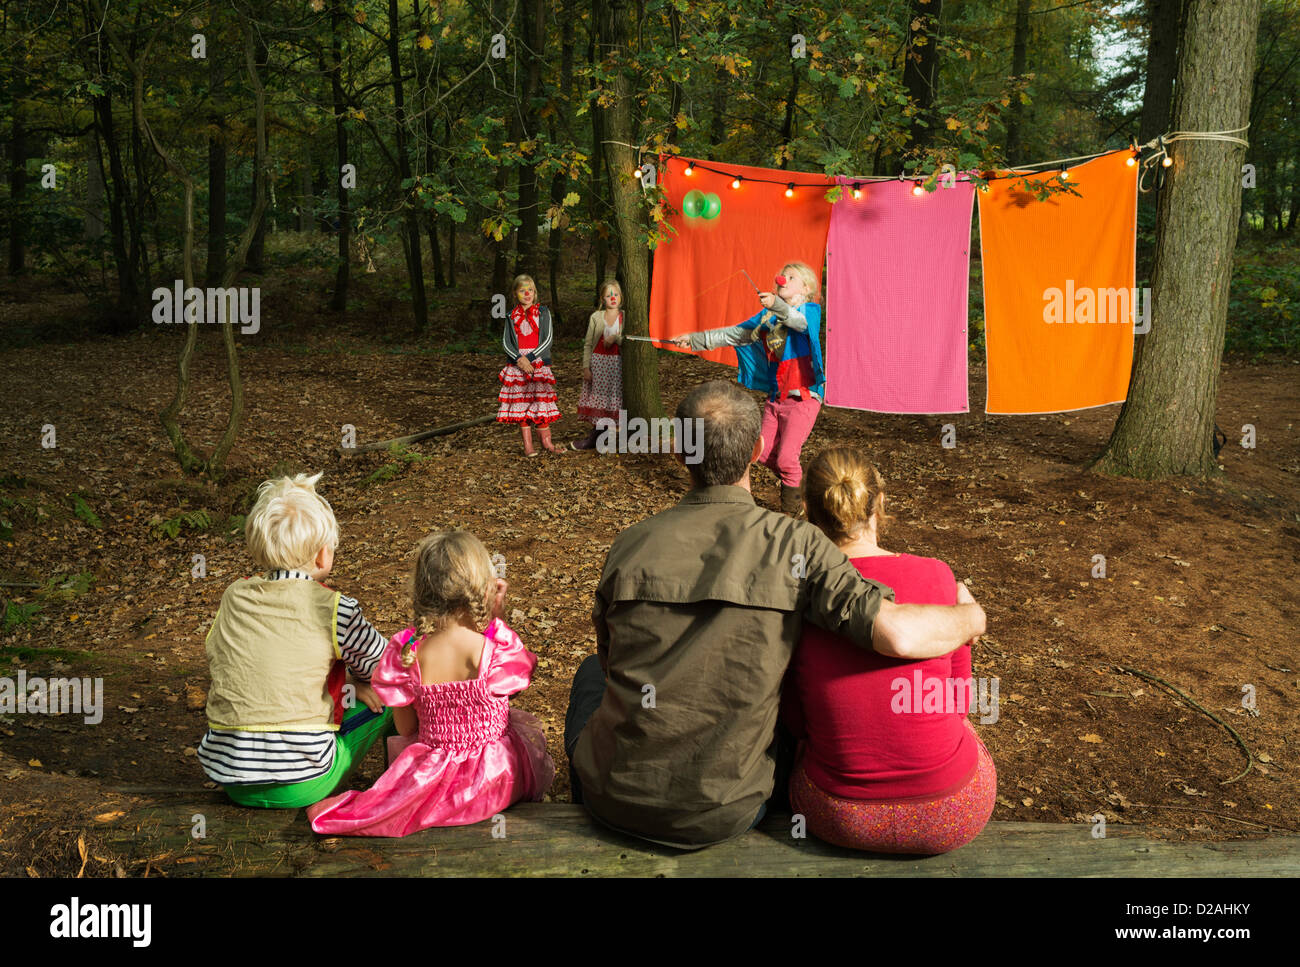 Childrens theater improvised in woods Stock Photo